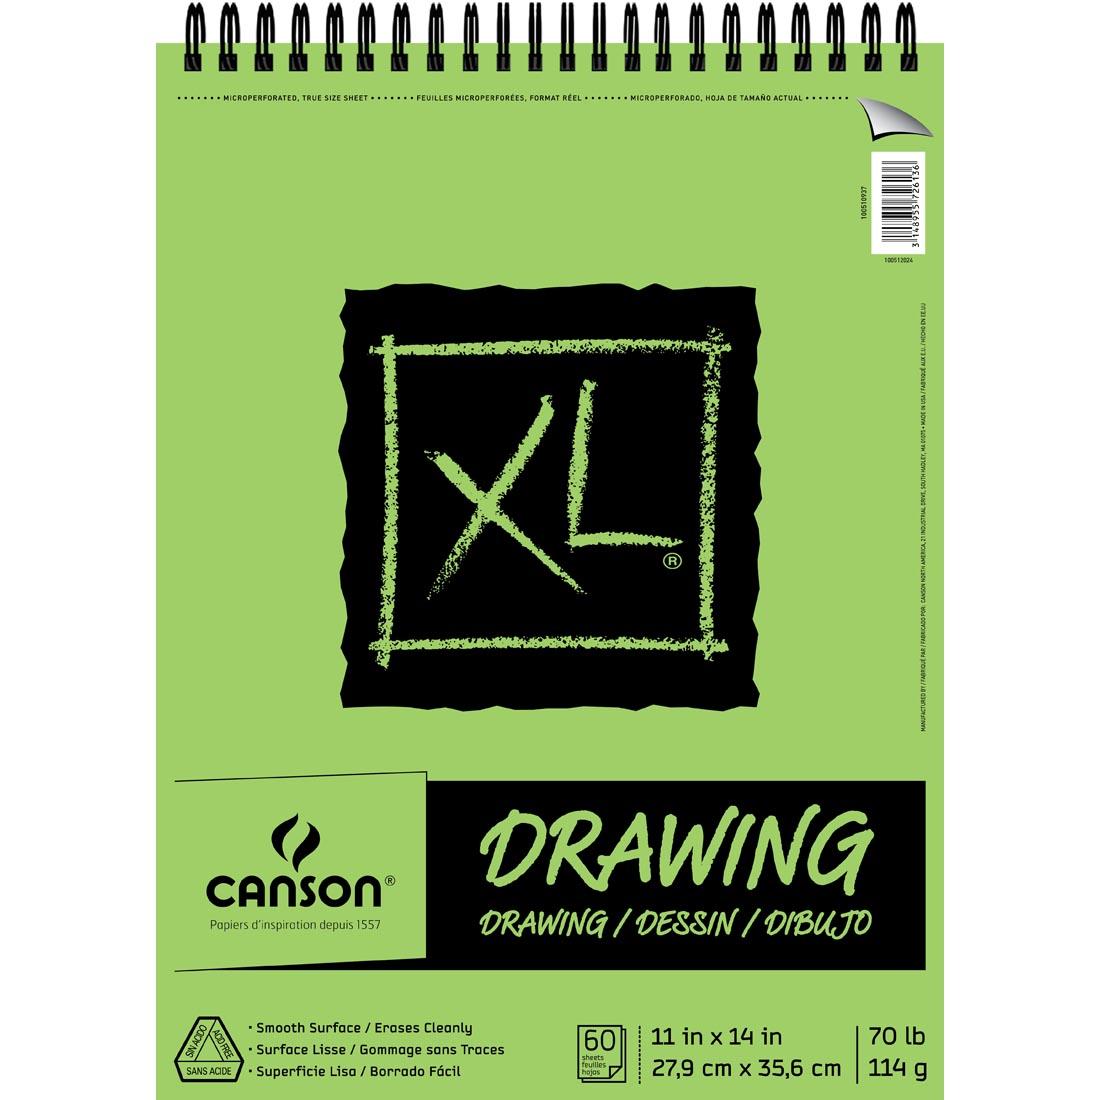 Canson XL Series Drawing Pad